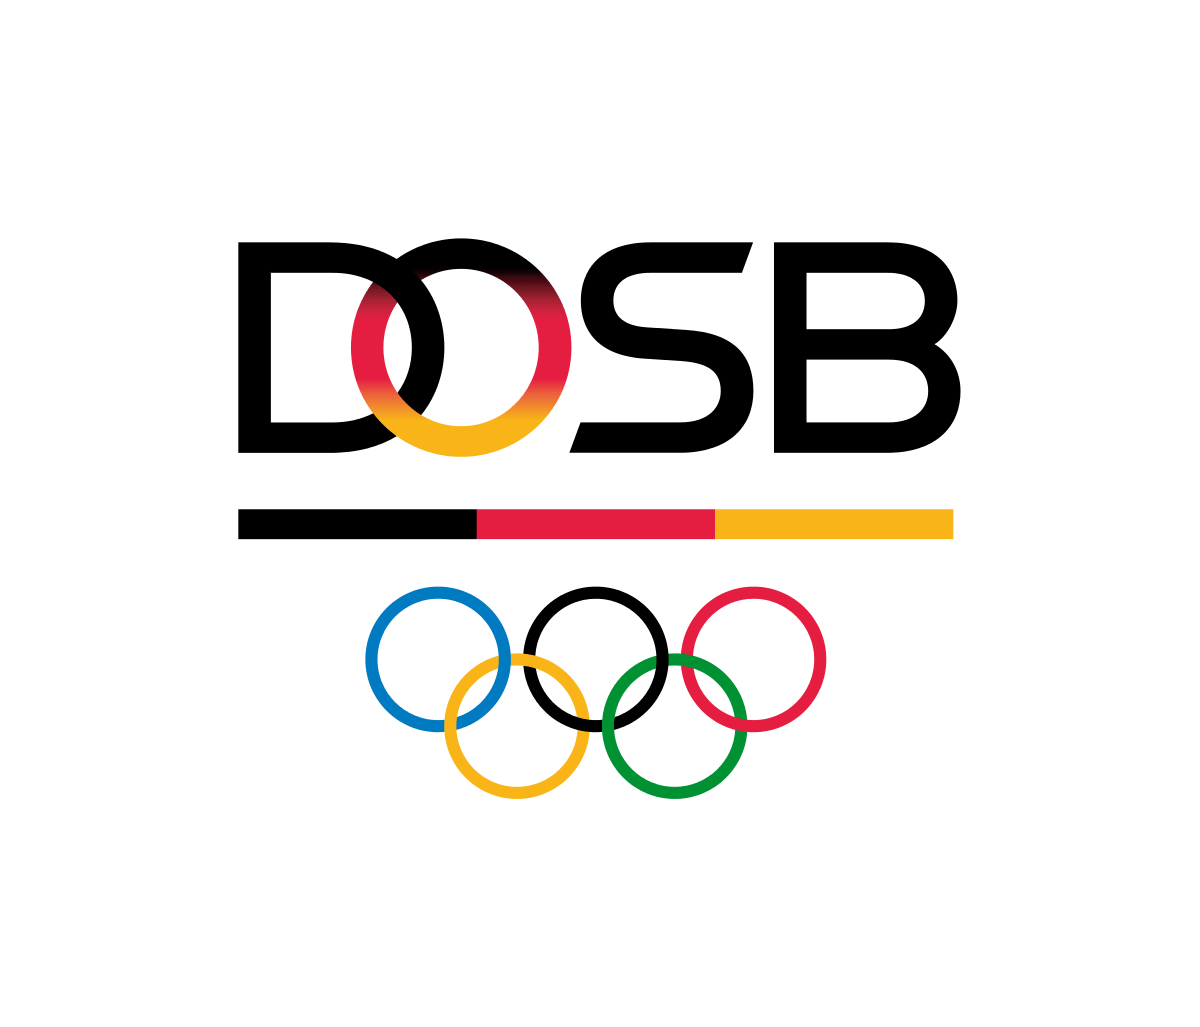 The German Olympic Sports Federation (DOSB) recently released a report saying that esports will not be considered sports in their opinion